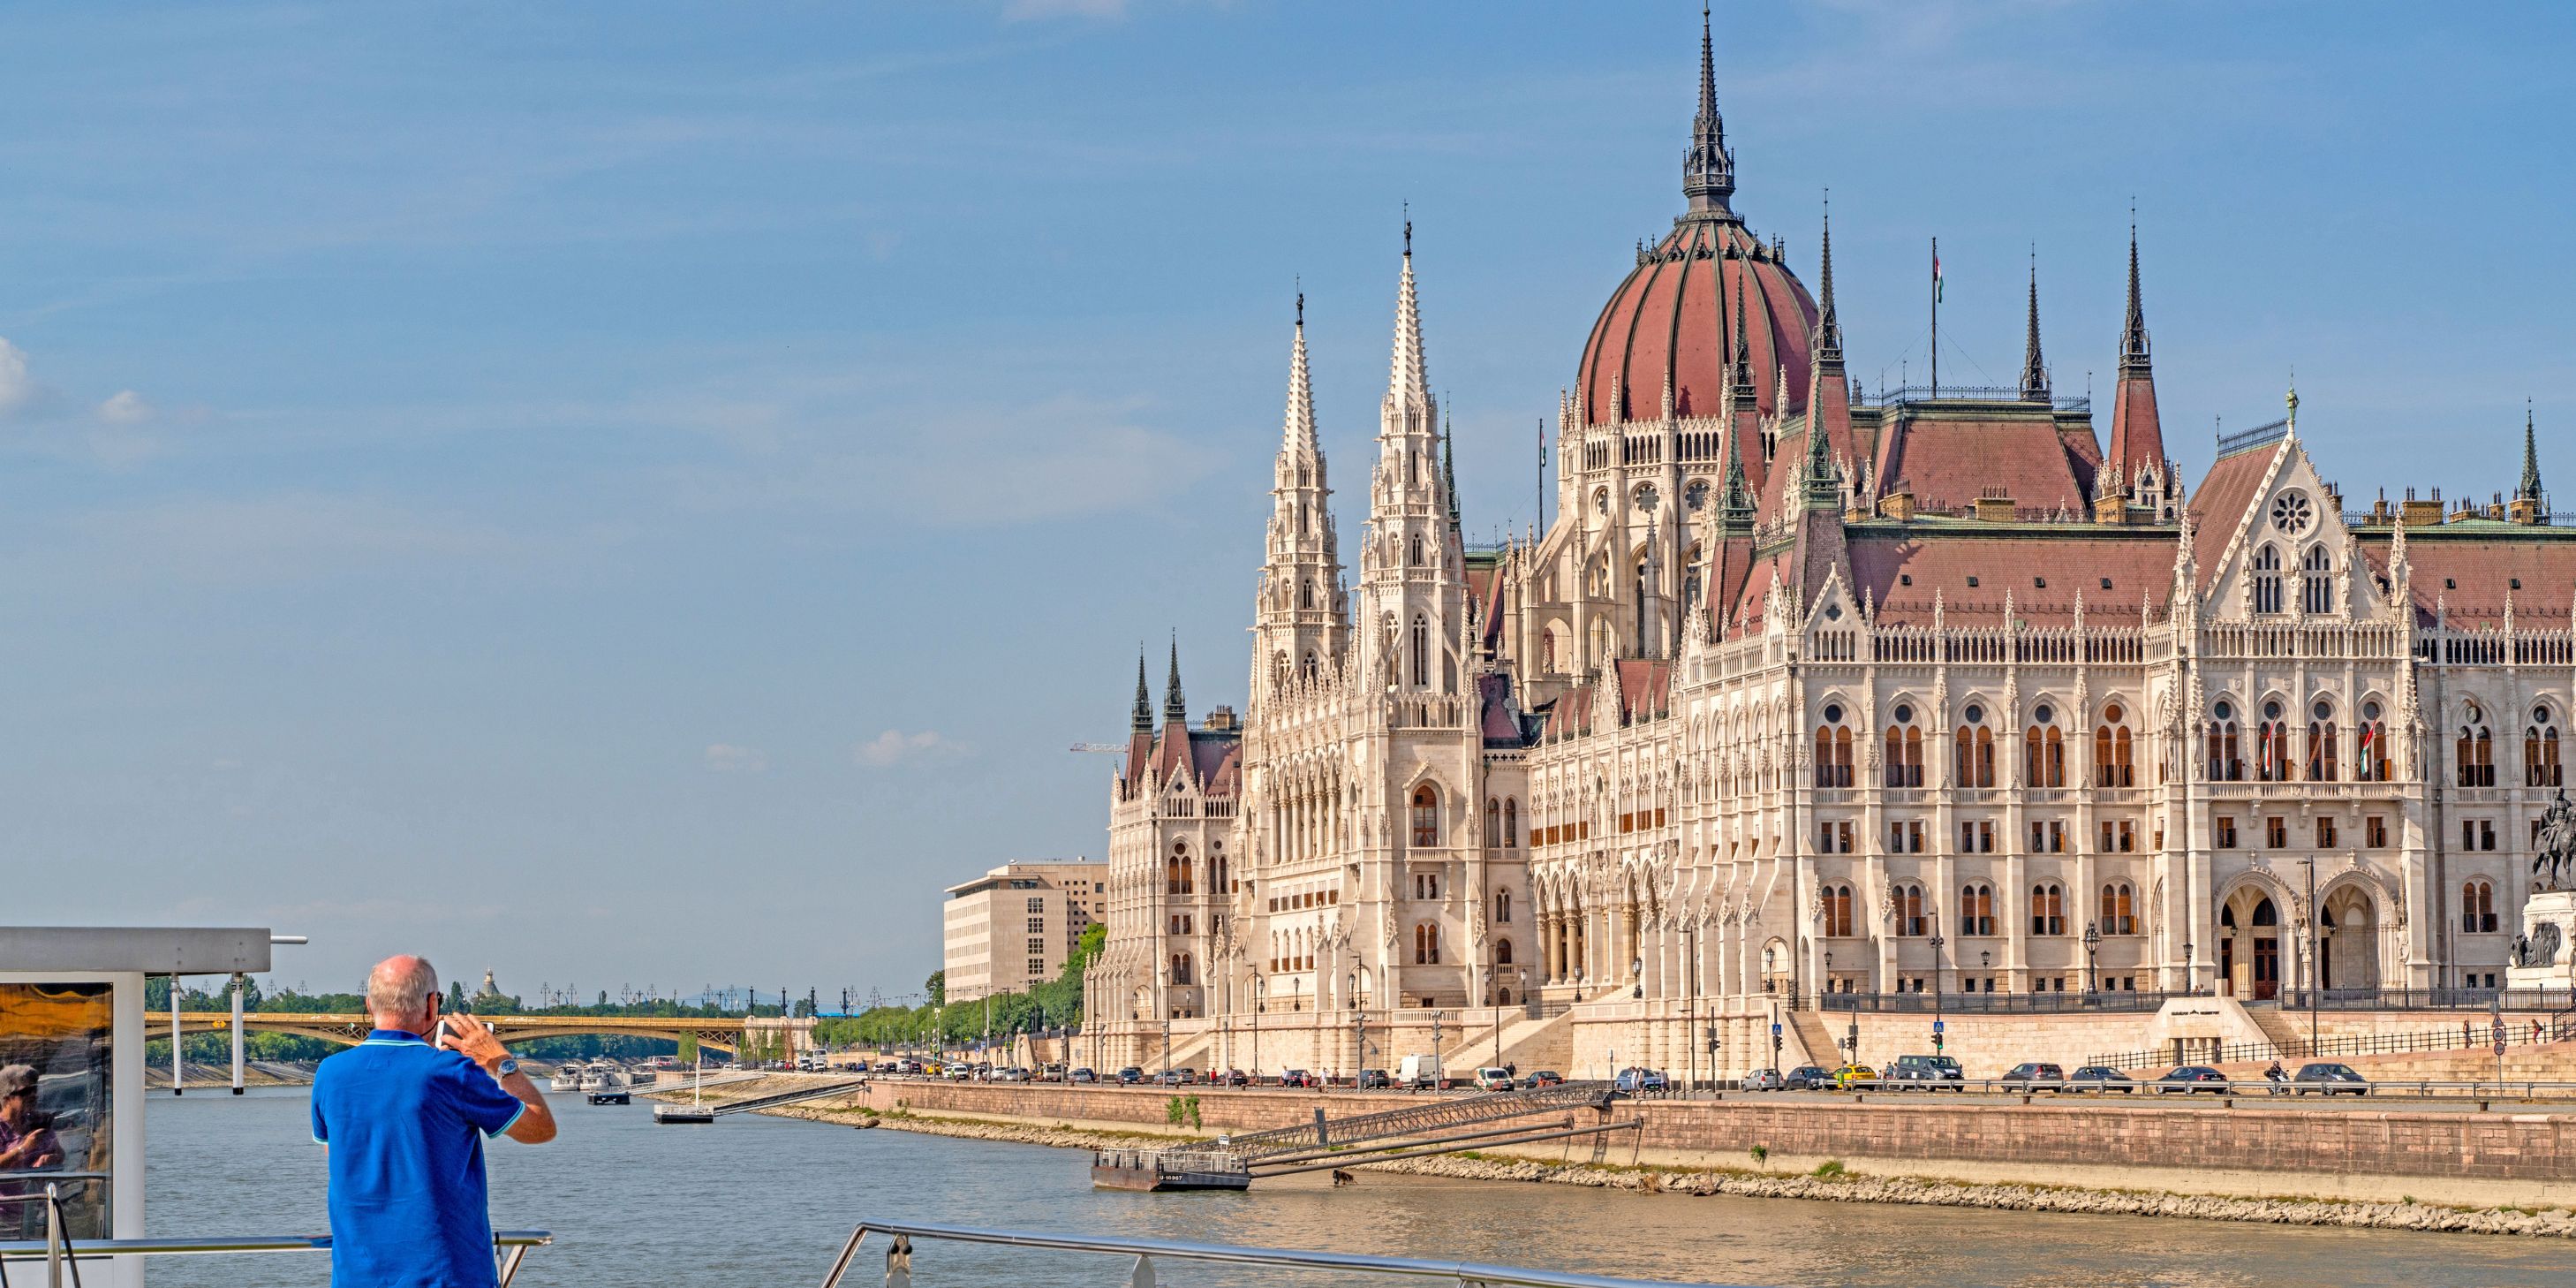 Budapest Parliament Building from the Sun Deck of a Scenic cruise ship on a clear day. A man dressed in a blue t shirt and shorts takes a photo of the view on his smartphone. 